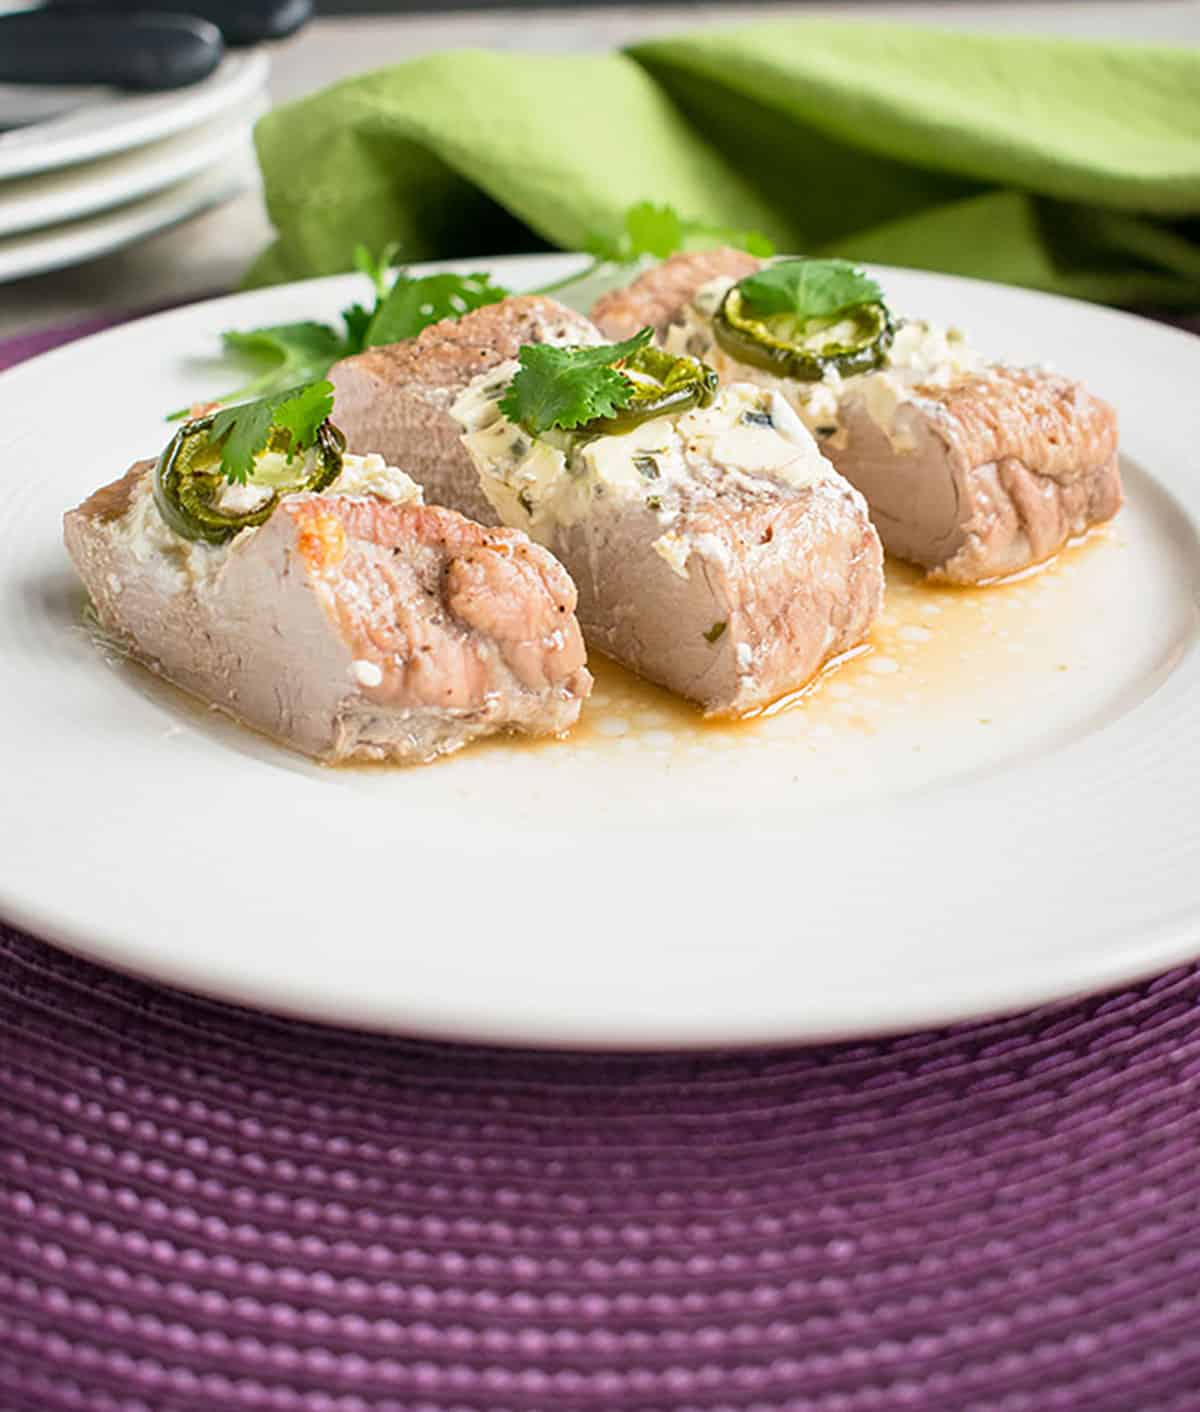 pork tenderloin stuffed with cream cheese and jalapeño garnished with cilantro